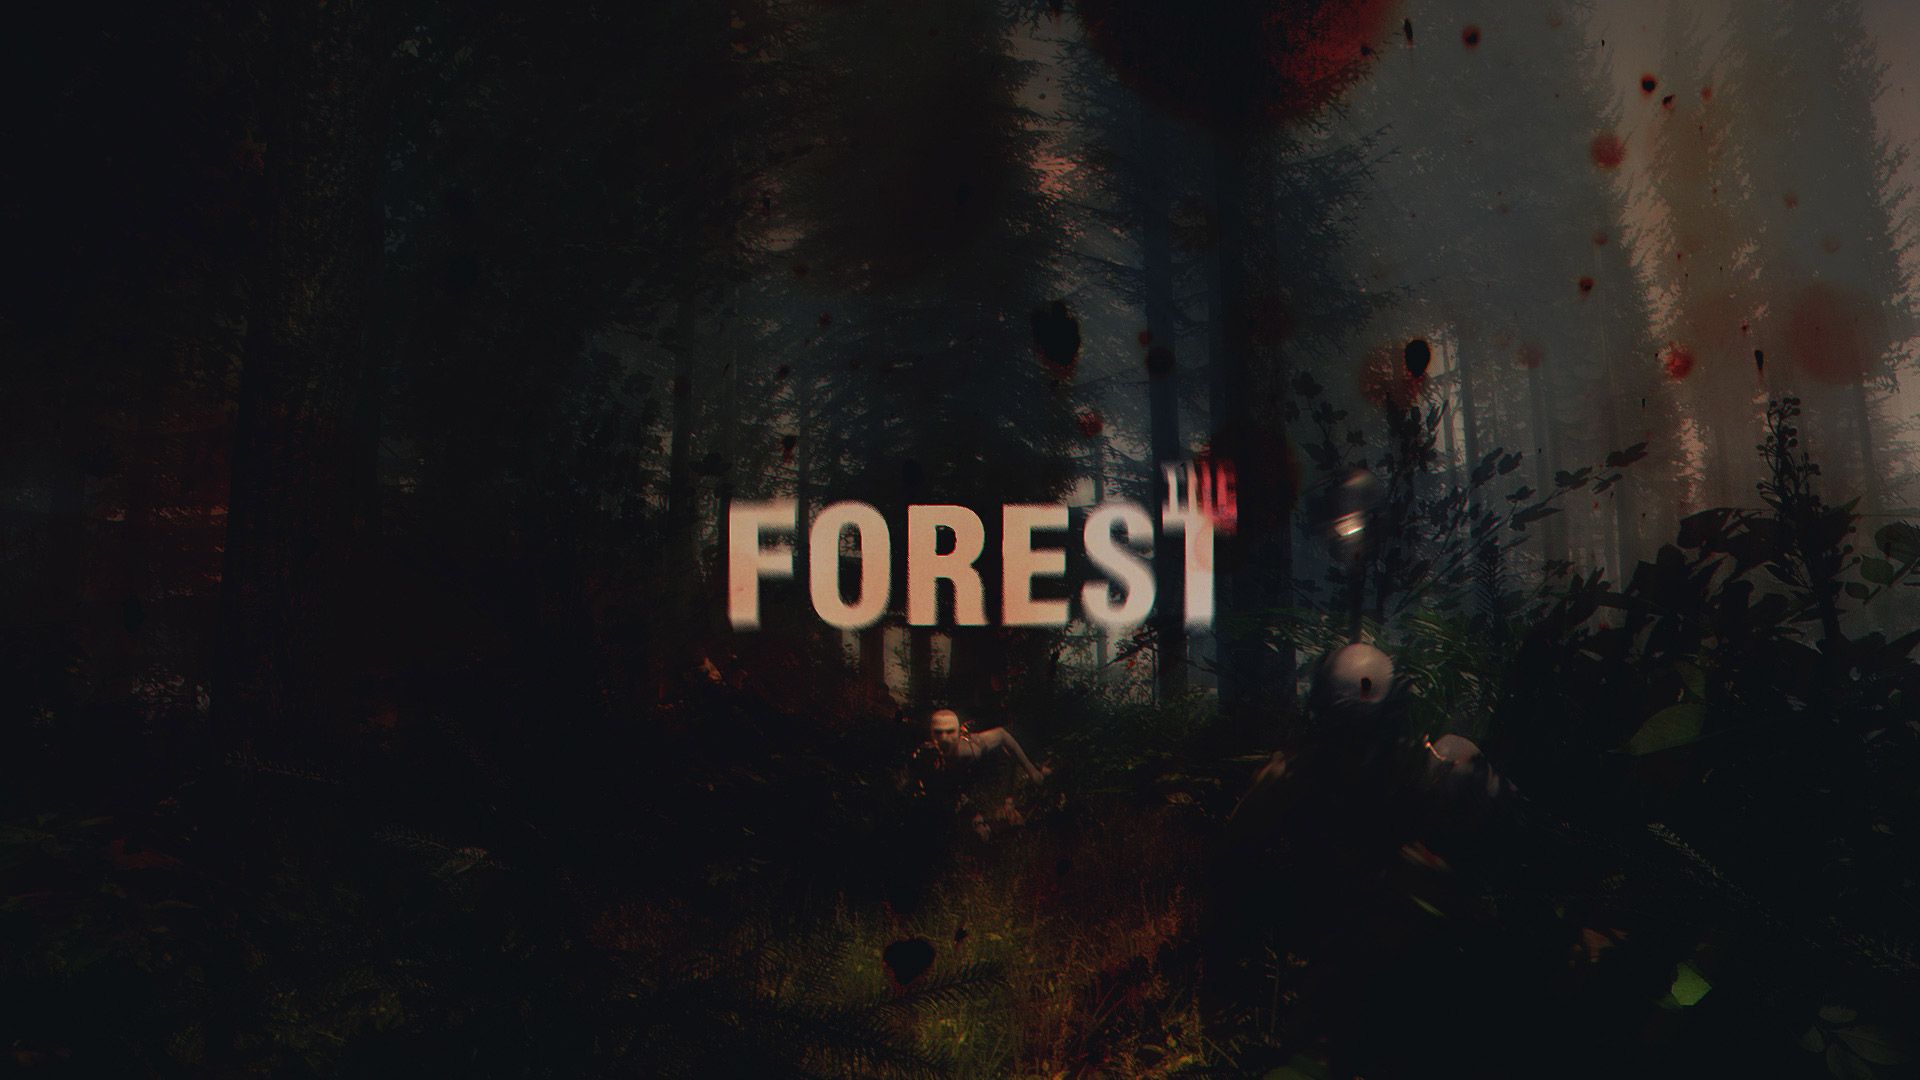 Free The Forest Wallpaper in 1920x1080